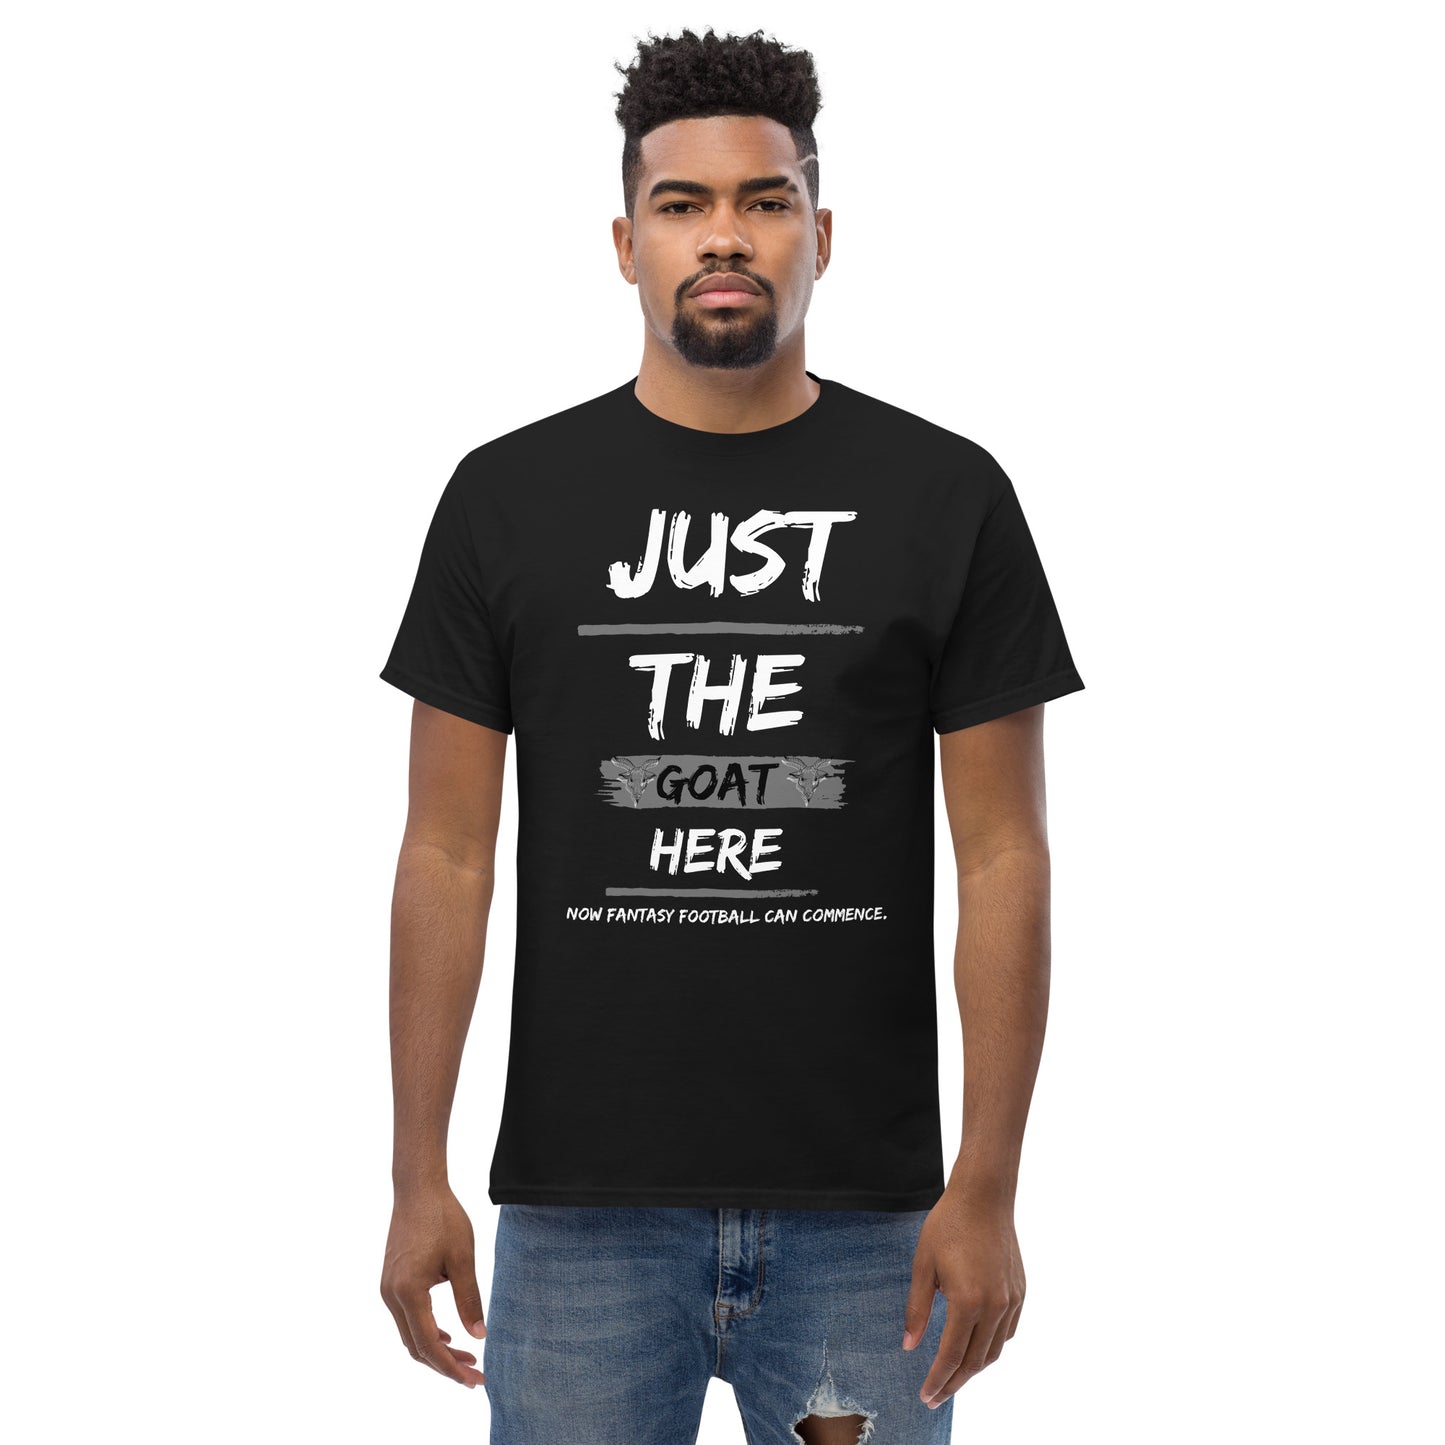 Just the Goat Here Men's Tee Shirt